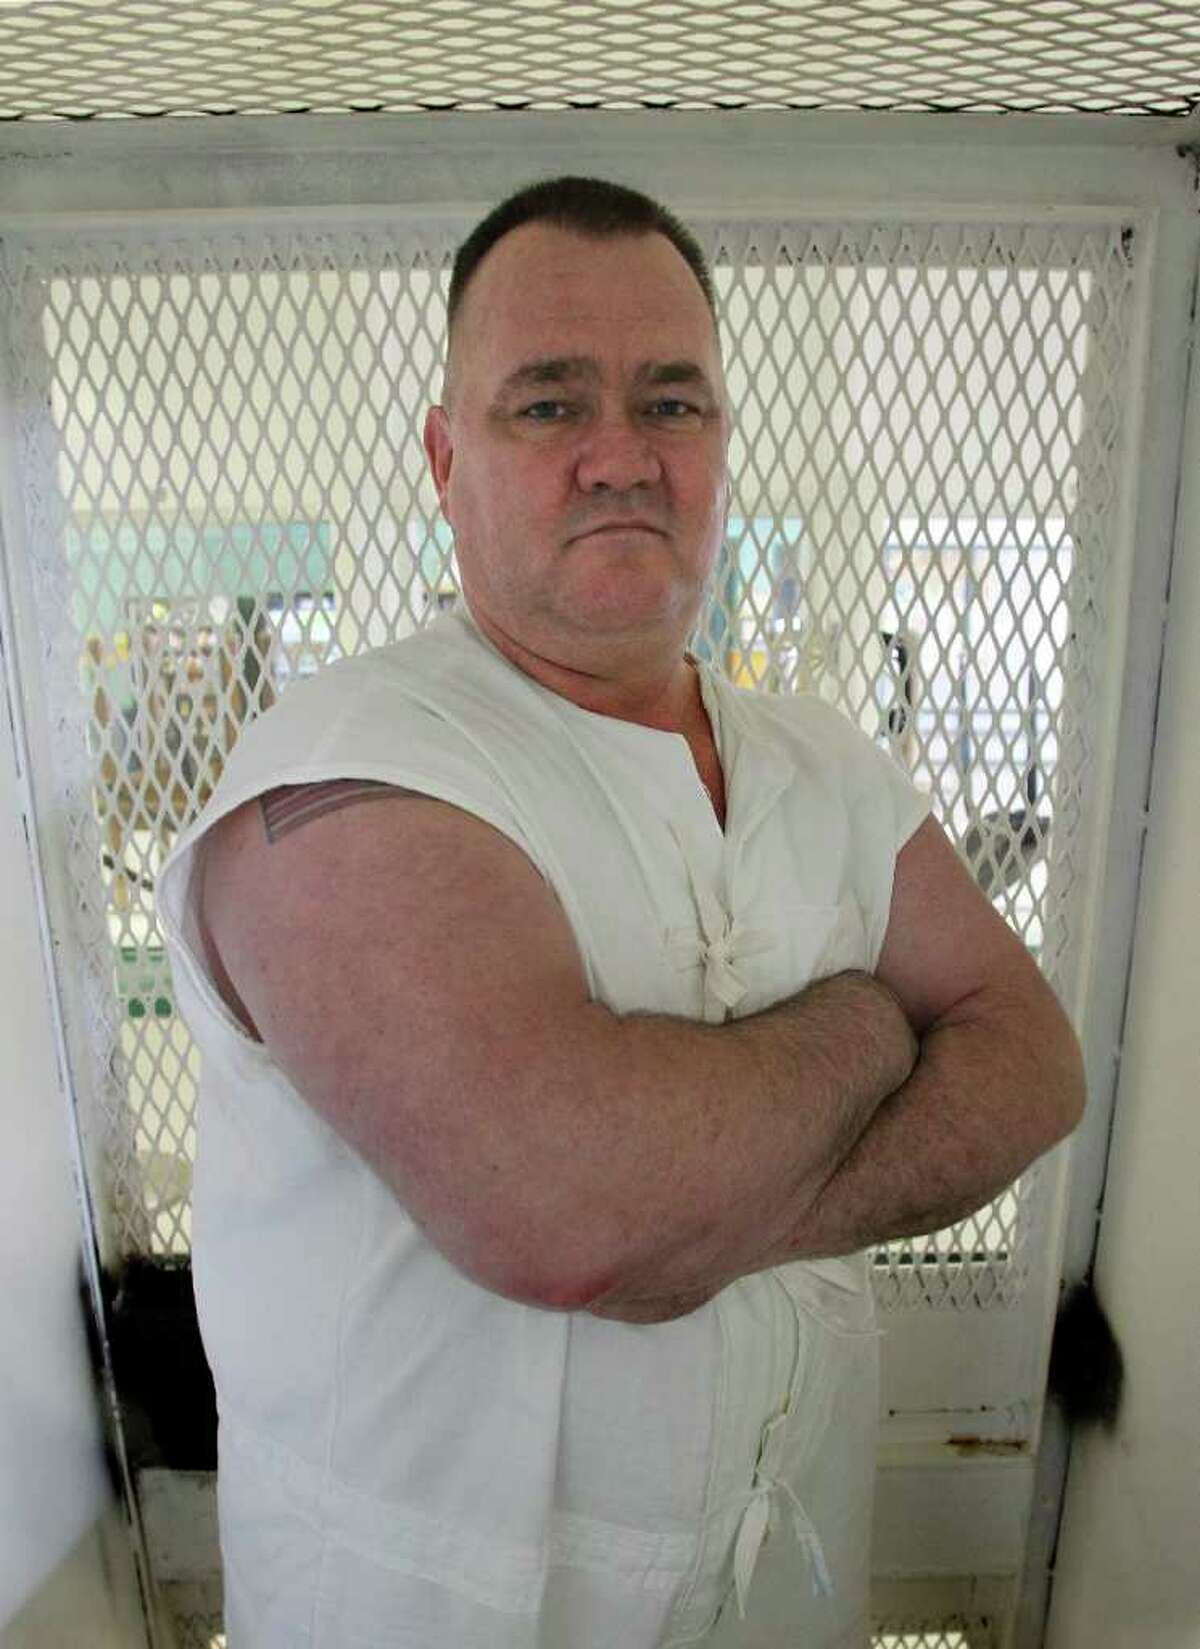 FILE - Texas death row inmate Cleve Foster poses for a picture at the Polunsky Unit in Livingston, Texas on March 30, 2011. Condemned inmate Cleve Foster already has been spared twice this year from the Texas death chamber and says he's not concerned another execution date is looming this week. The 47-year-old Foster is set to die Tuesday, Sept. 20, 2011 in Huntsville for the rape-slaying of a woman in Fort Worth nearly a decade ago. (AP Photo/Star-Telegram, Ron T. Ennis)